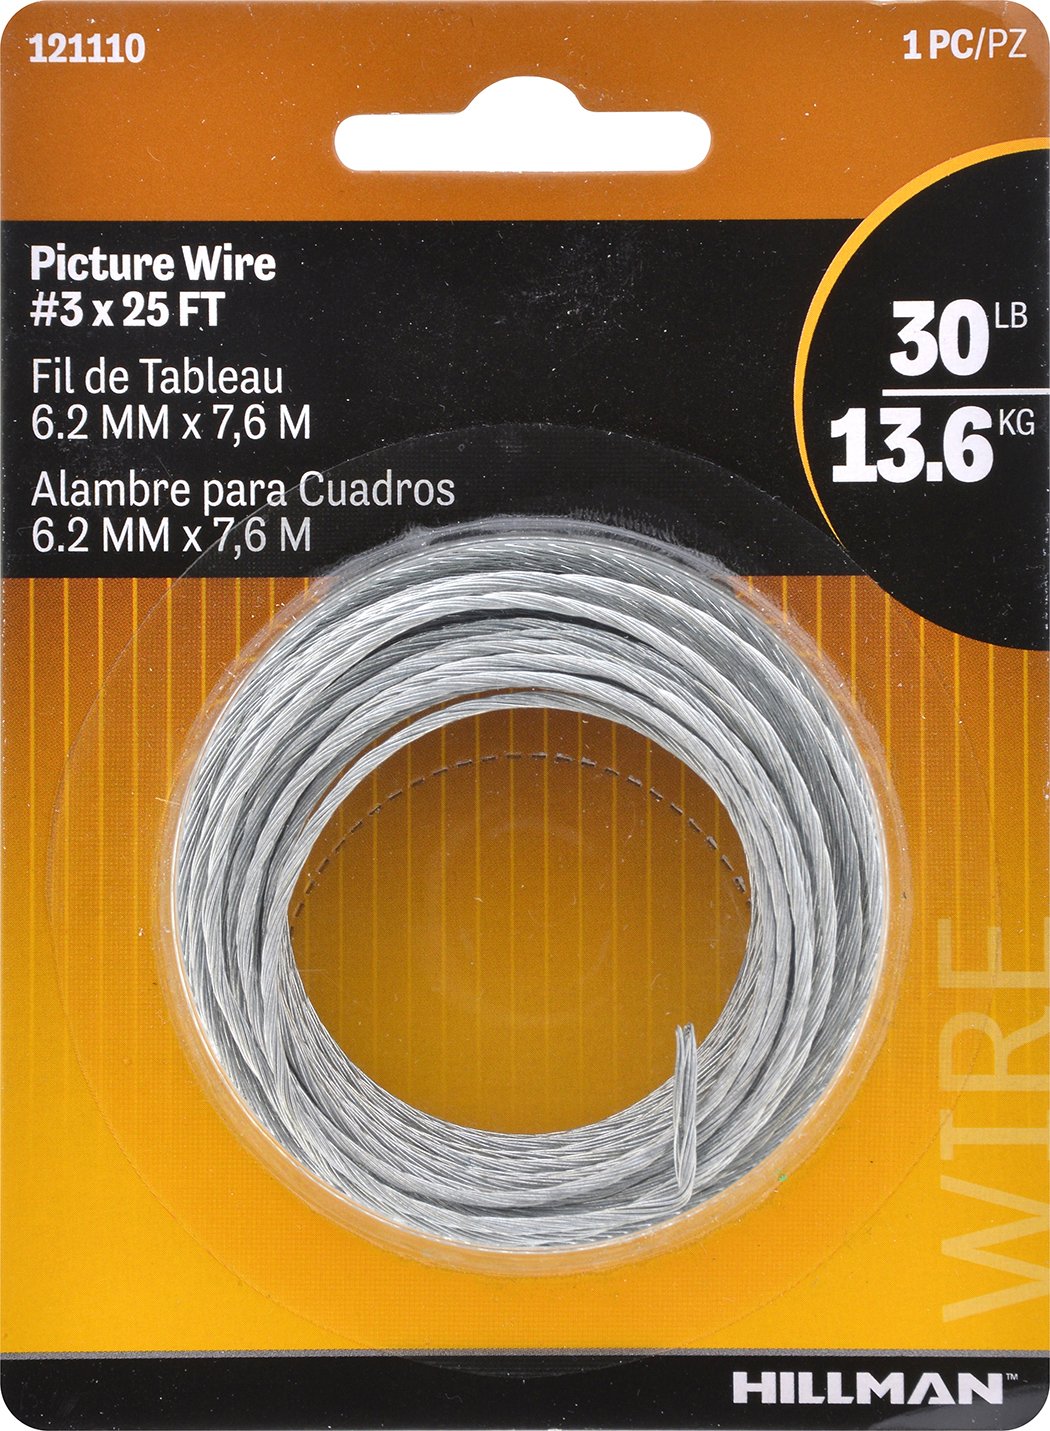 The Hillman Group 121110 Picture Hanging Wire, 30 lb, Galvanized